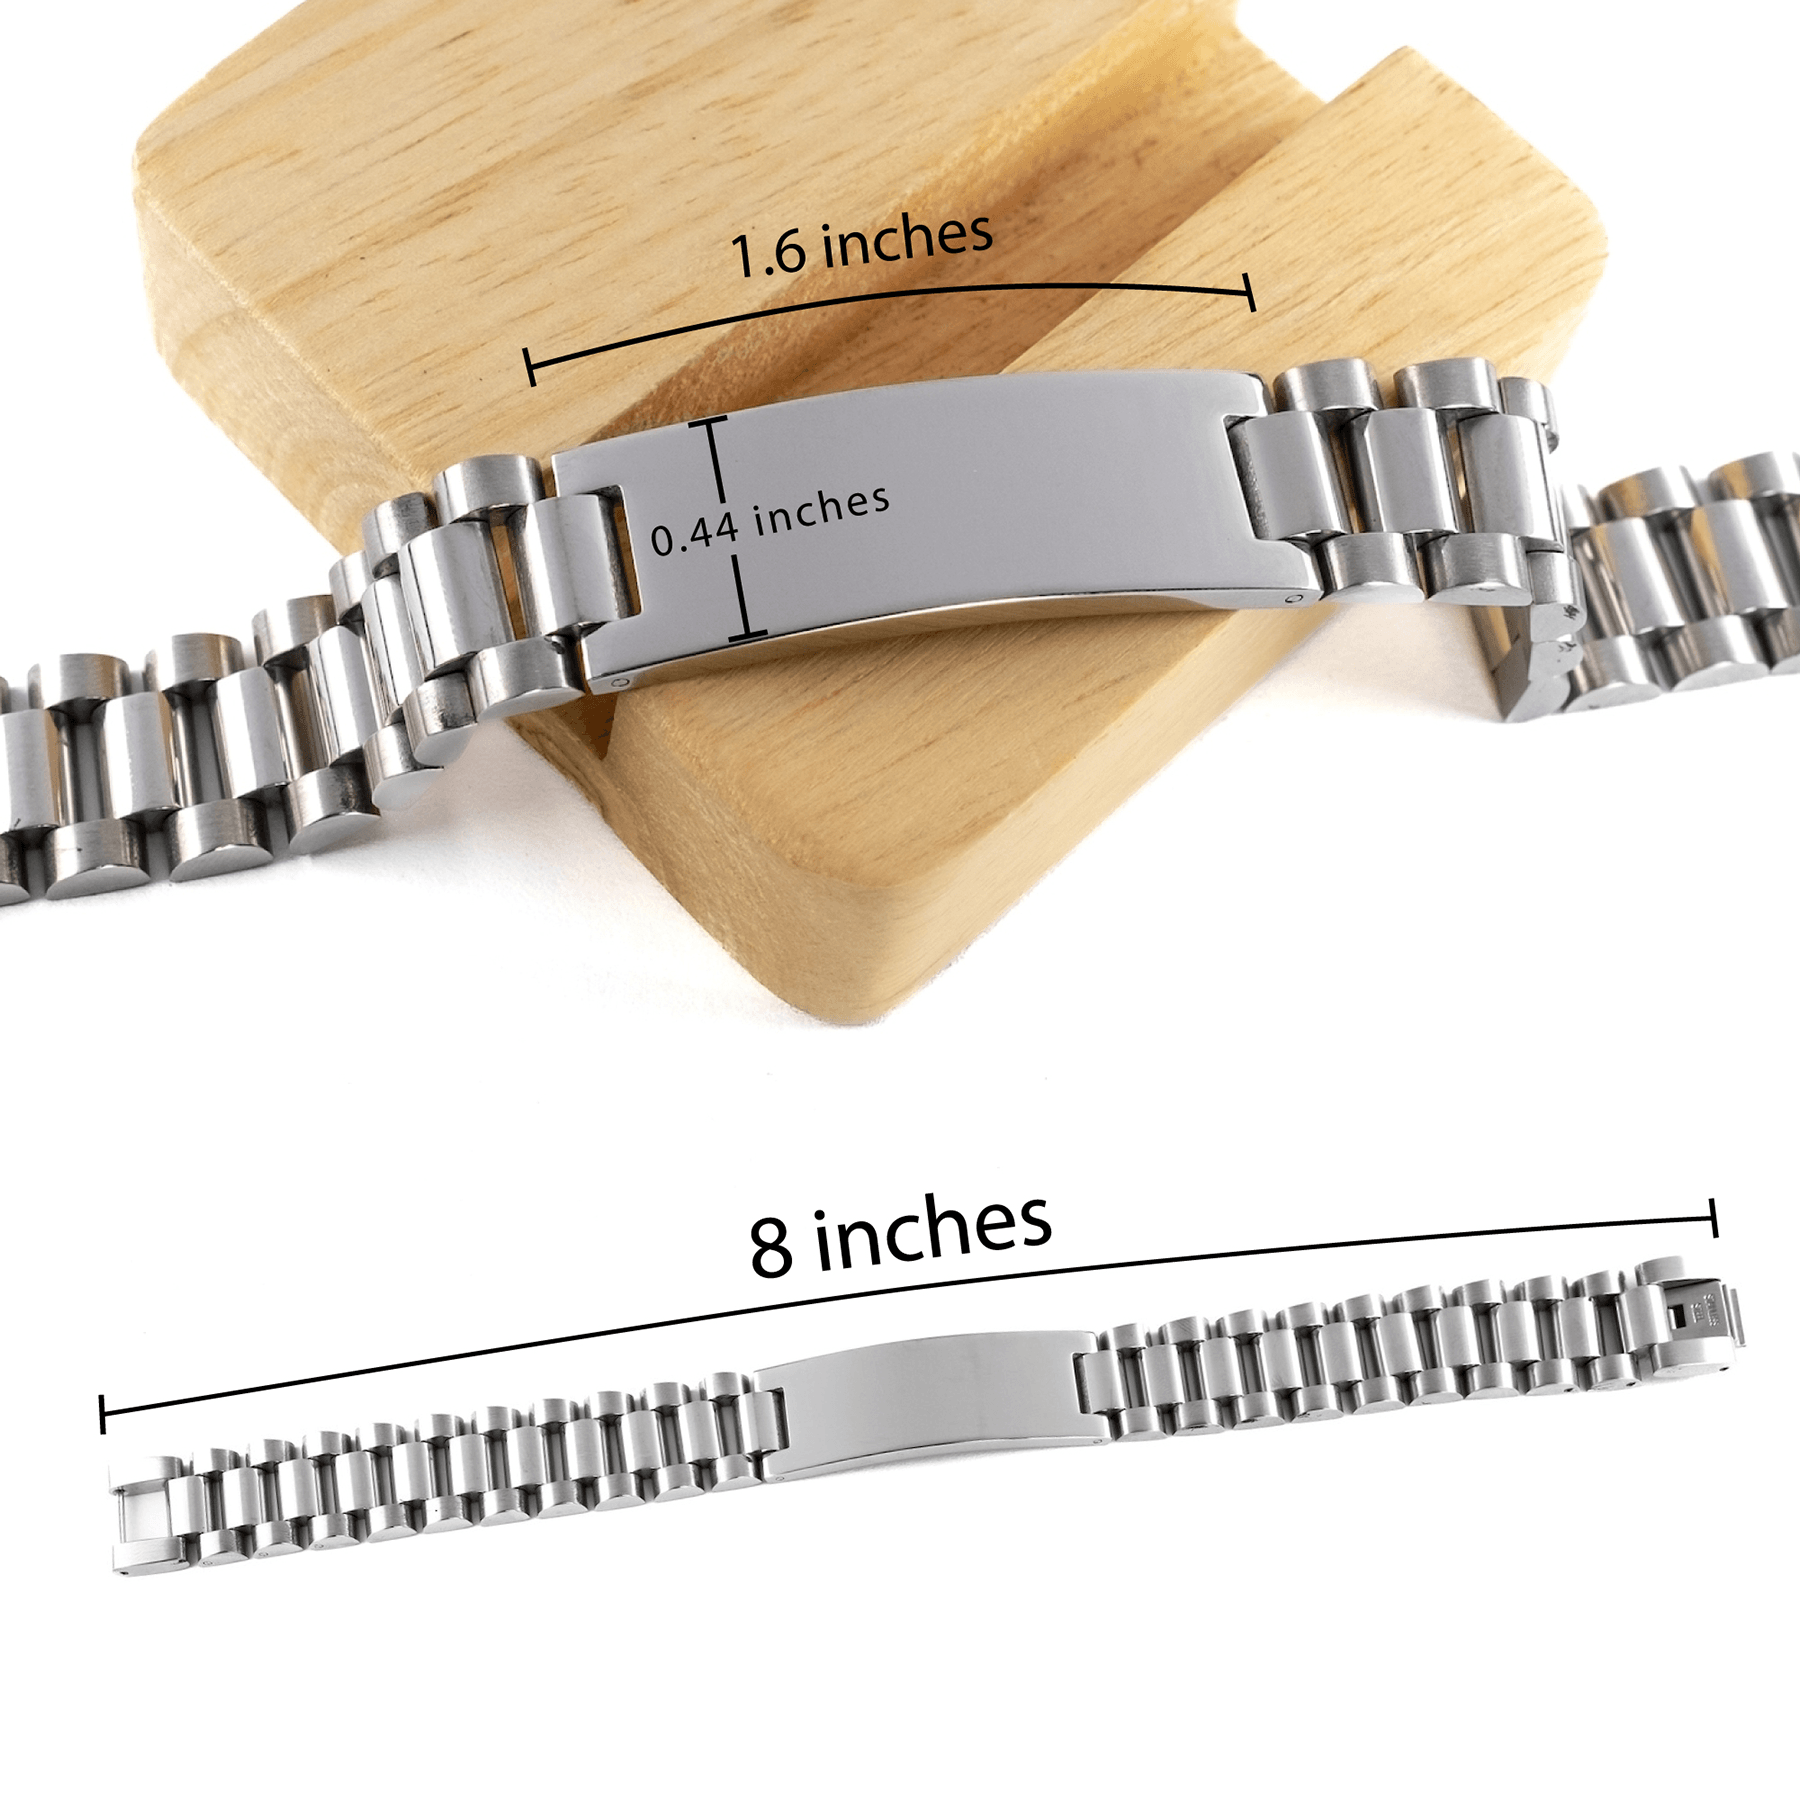 Aeronautical Engineer Ladder Stainless Steel Engraved Bracelet - Thanks for being who you are - Birthday Christmas Jewelry Gifts Coworkers Colleague Boss - Mallard Moon Gift Shop